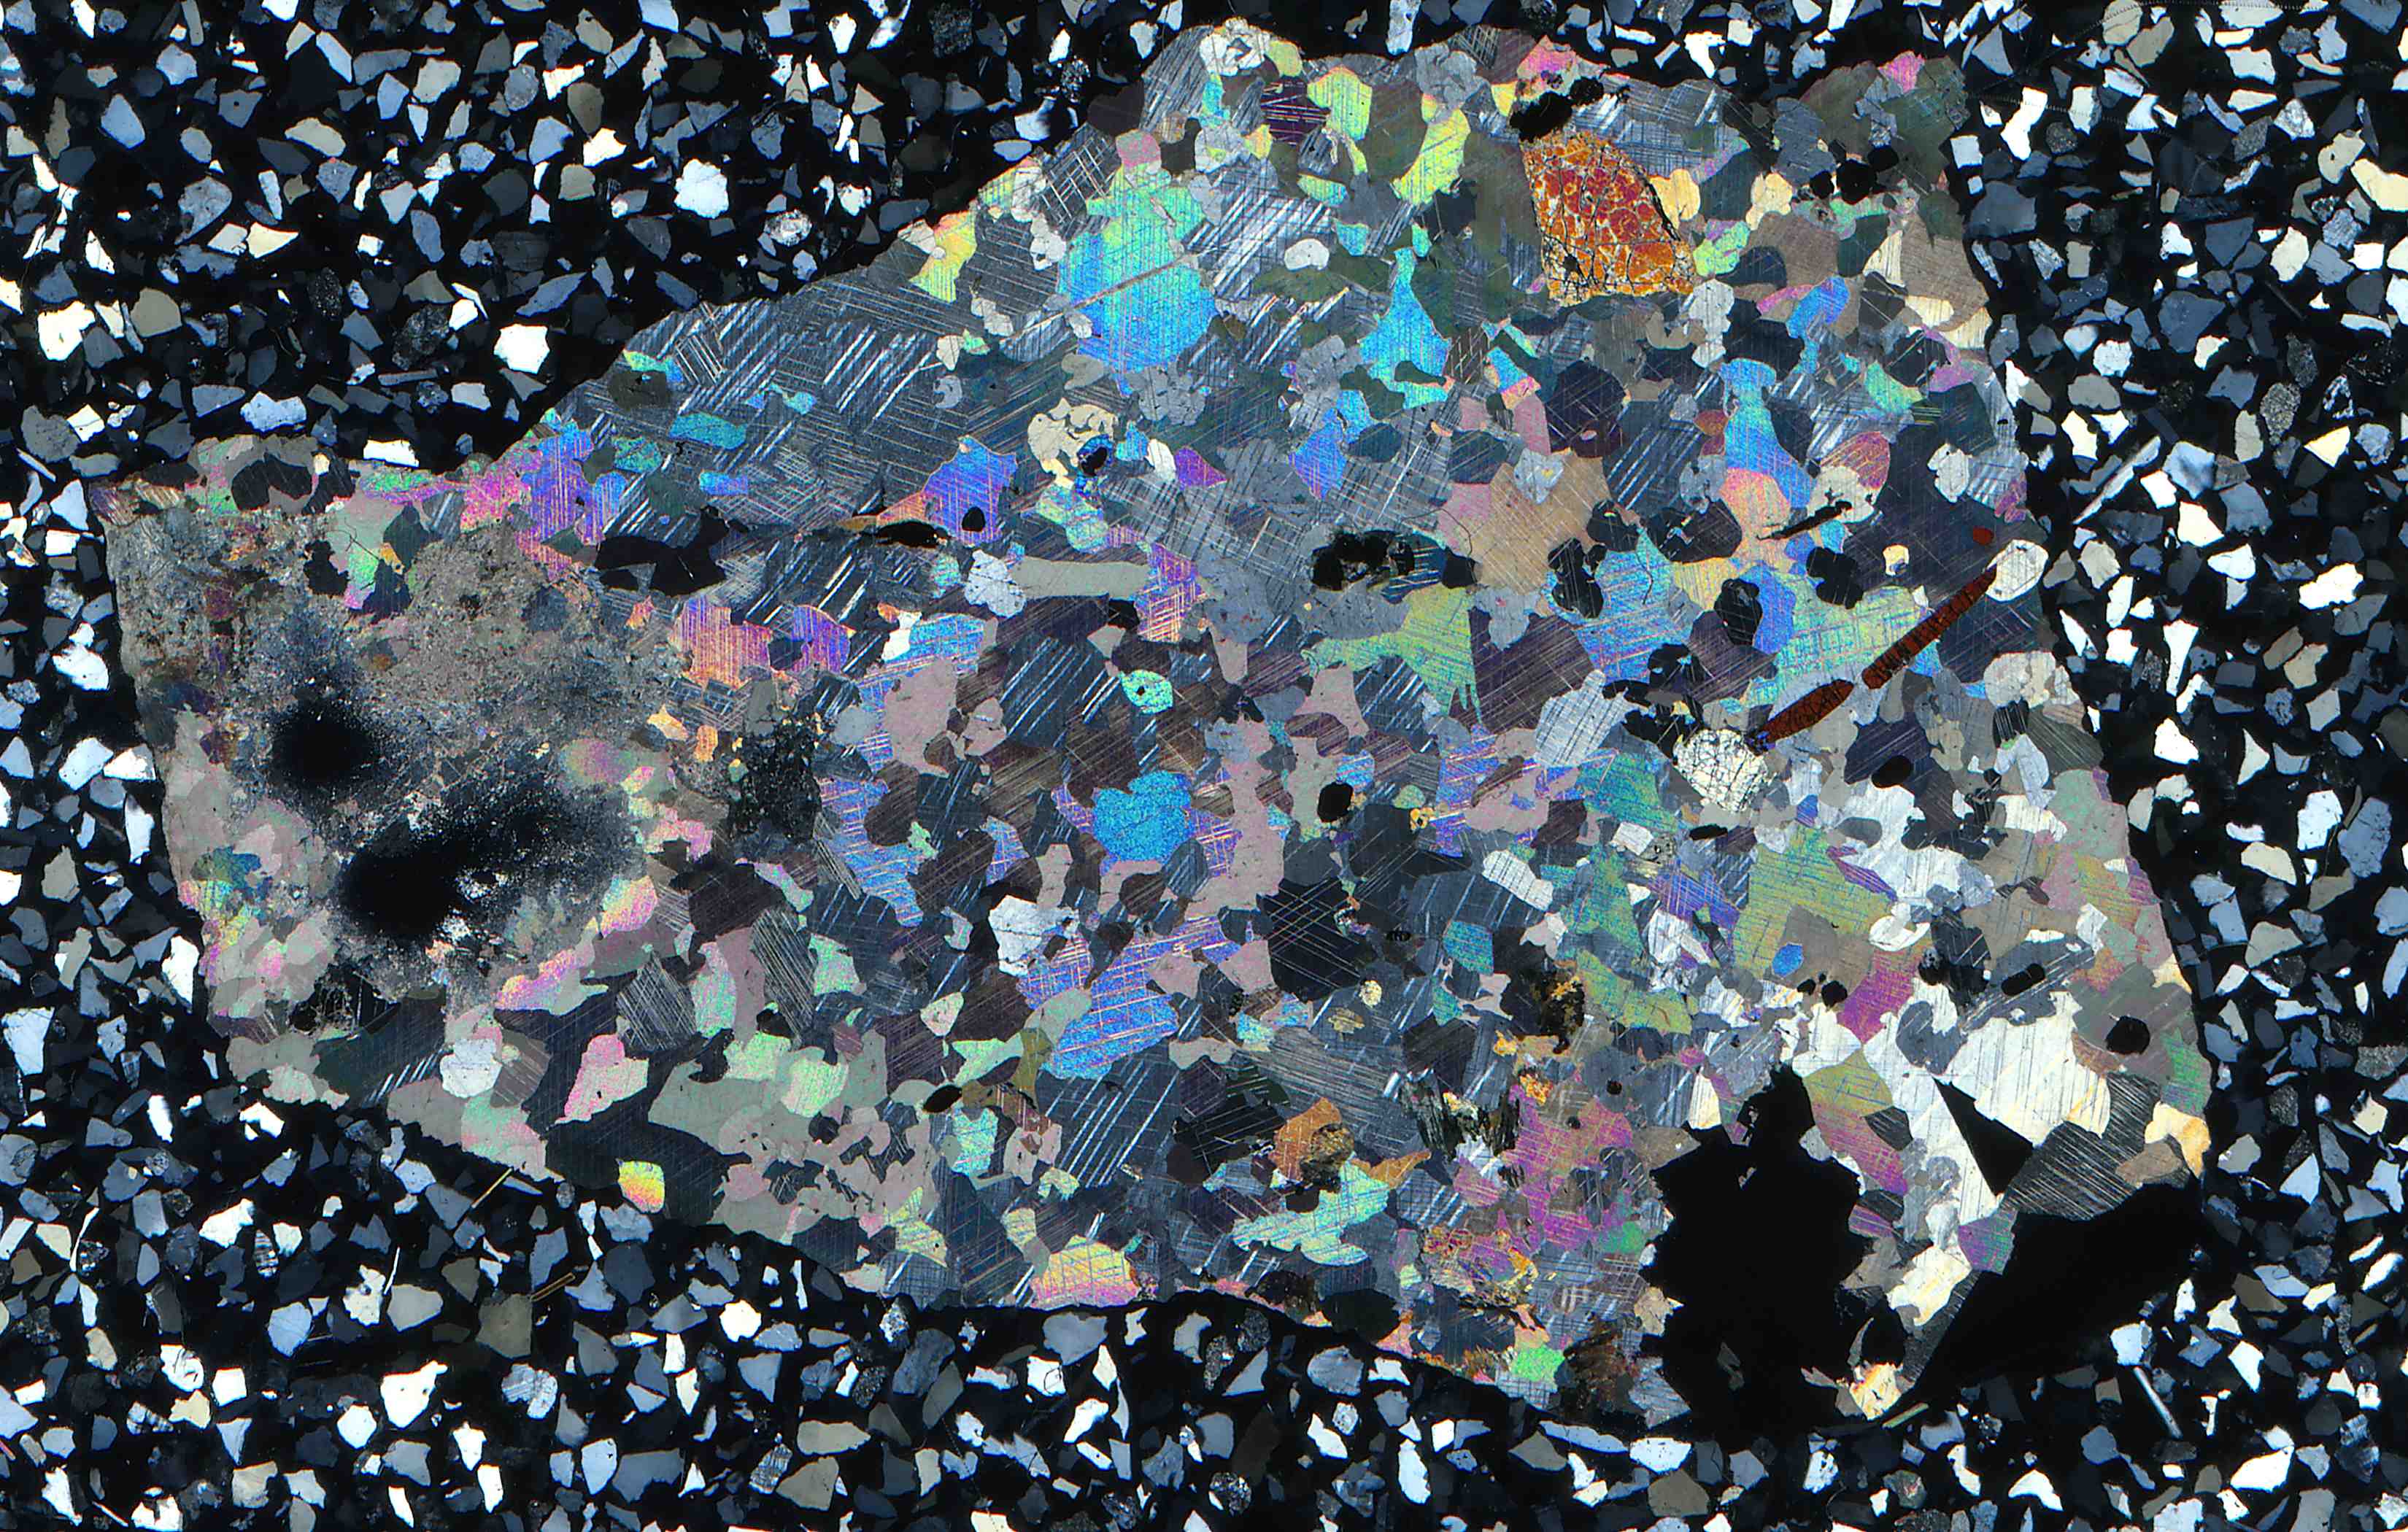 Edenville New York warwickite marble in thin section